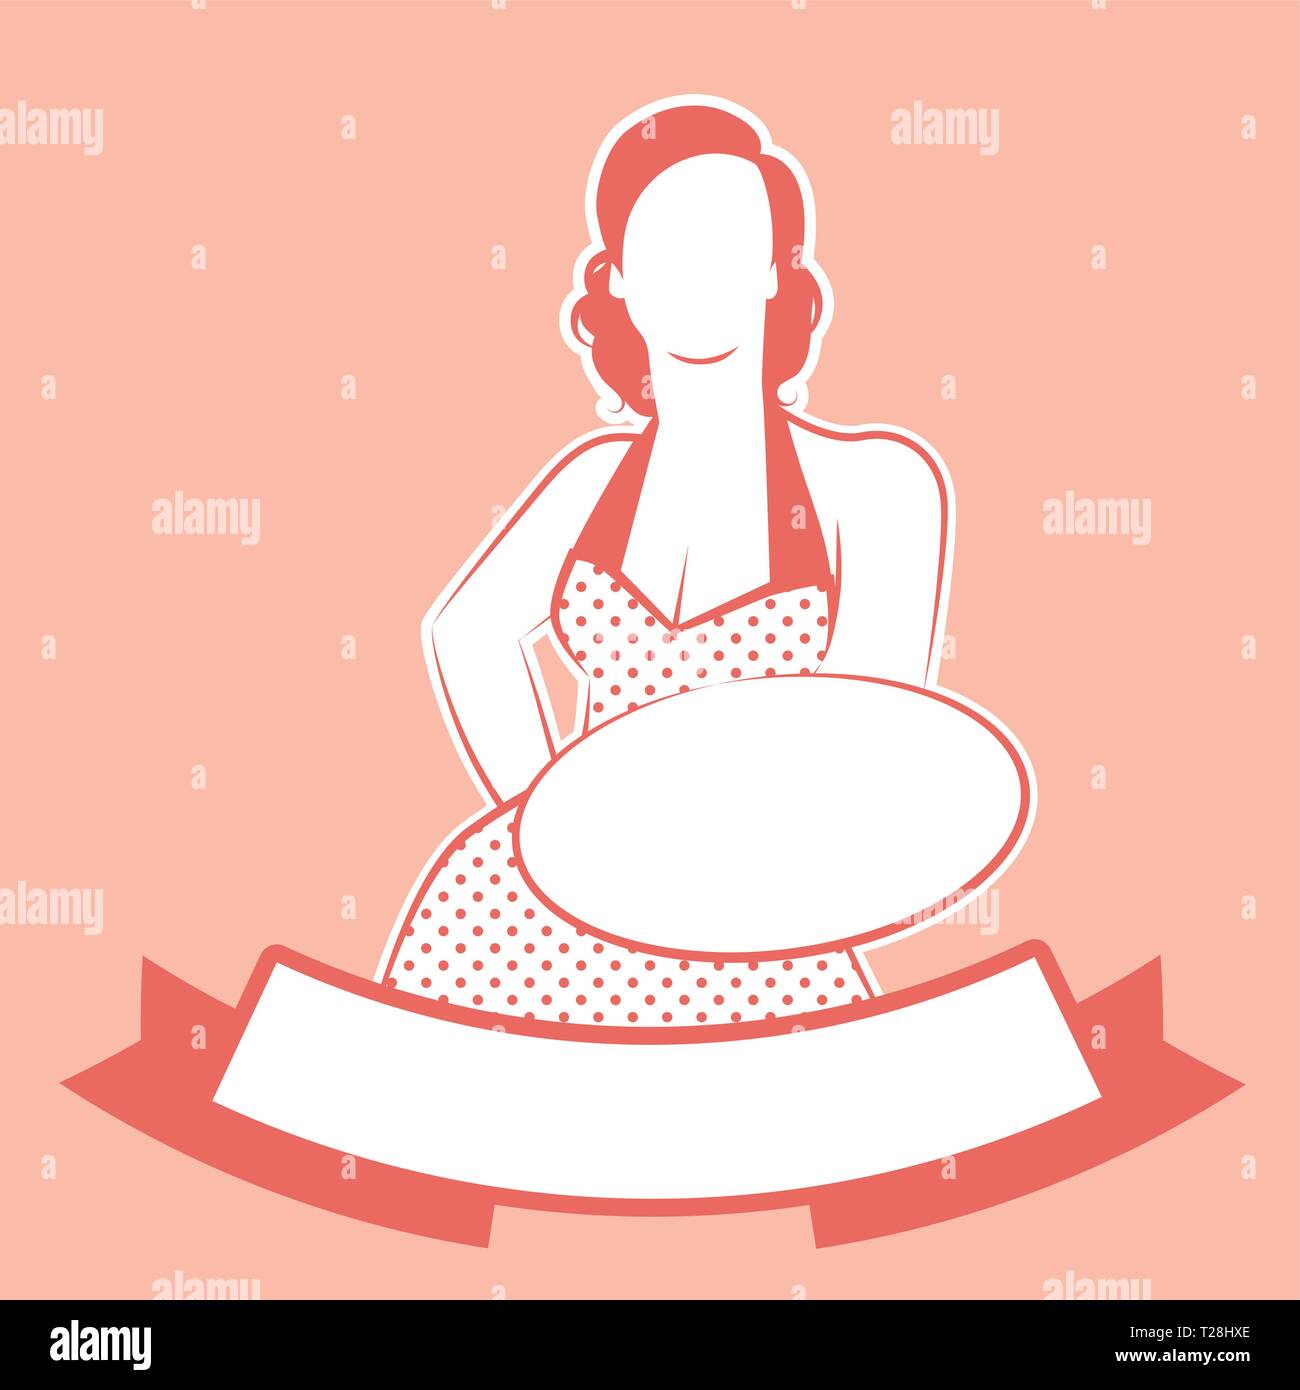 Retro housewife cook wearing polka dot dress showing a plate or tray and blank label for your text Stock Vector